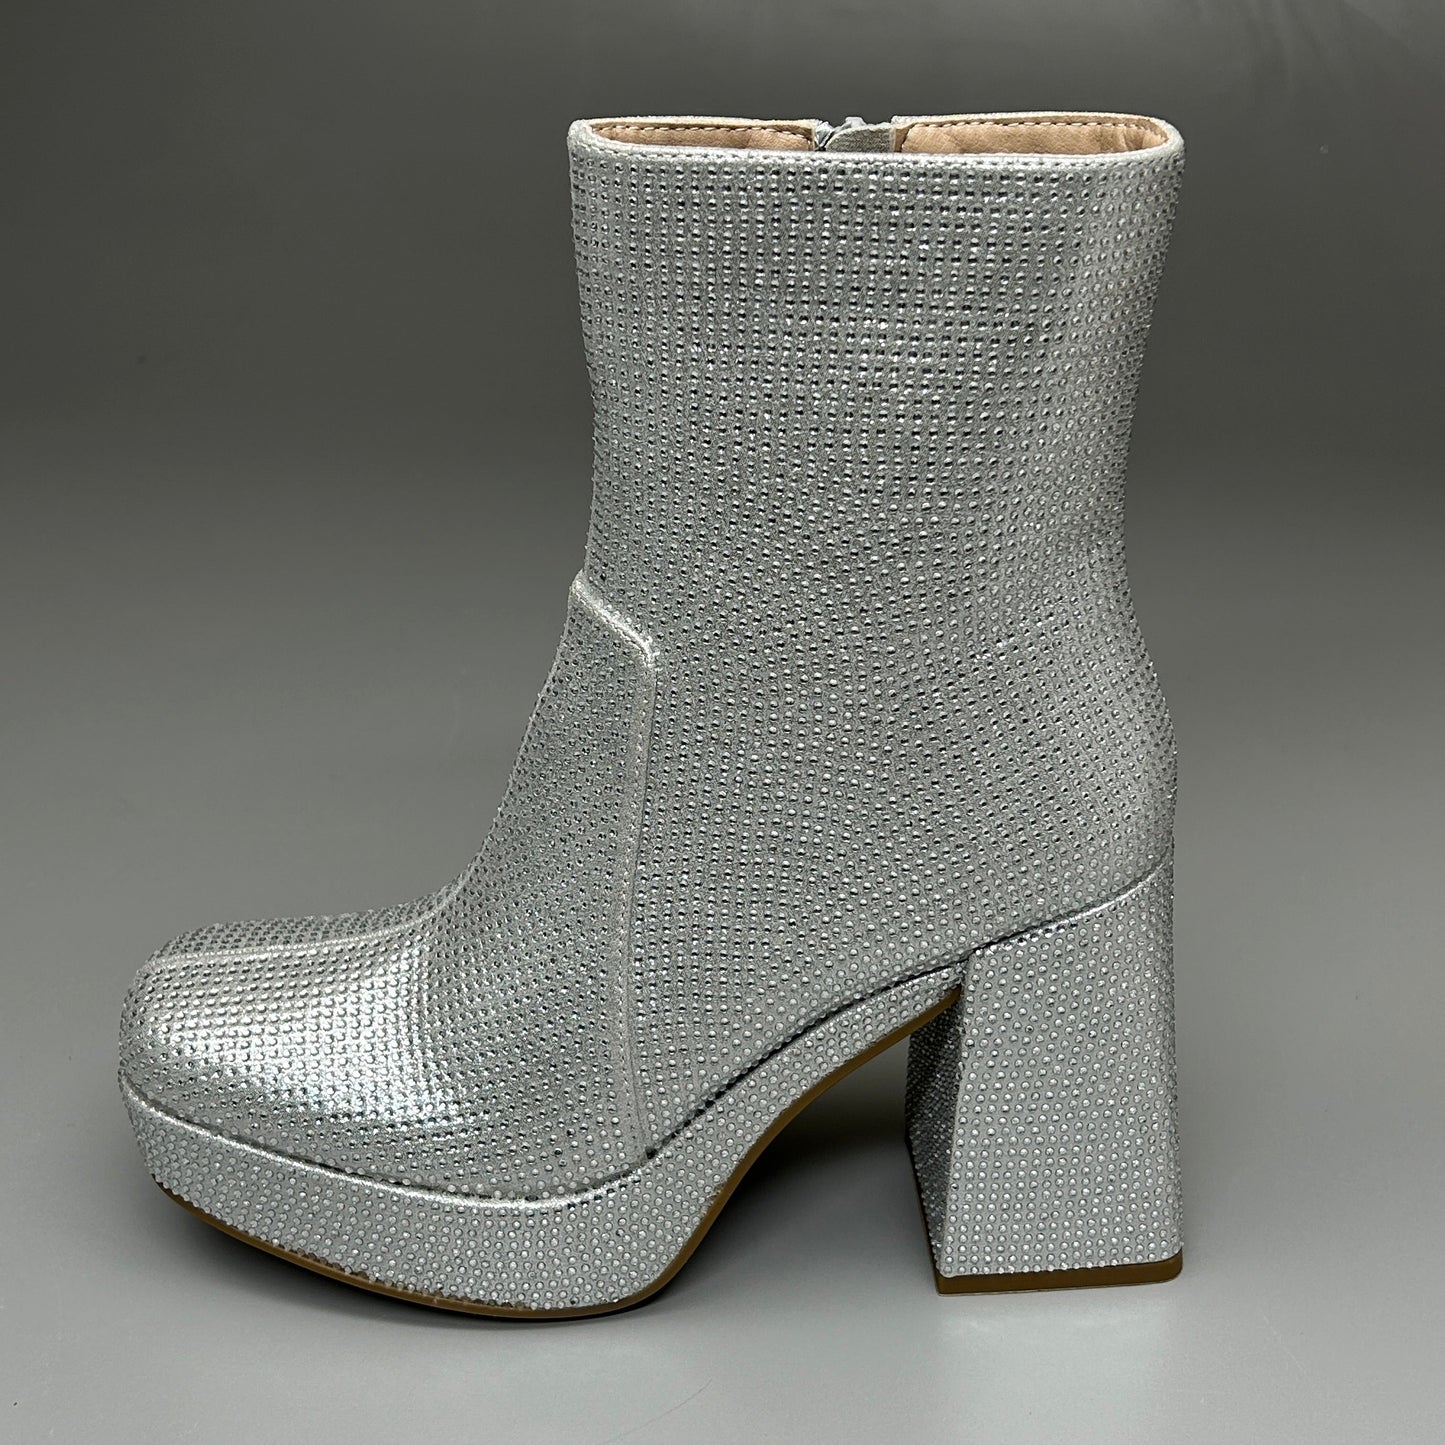 MIA Iva Silver Stone Heeled Boots Women's Sz 9.5 Silver GS1253108 (New)